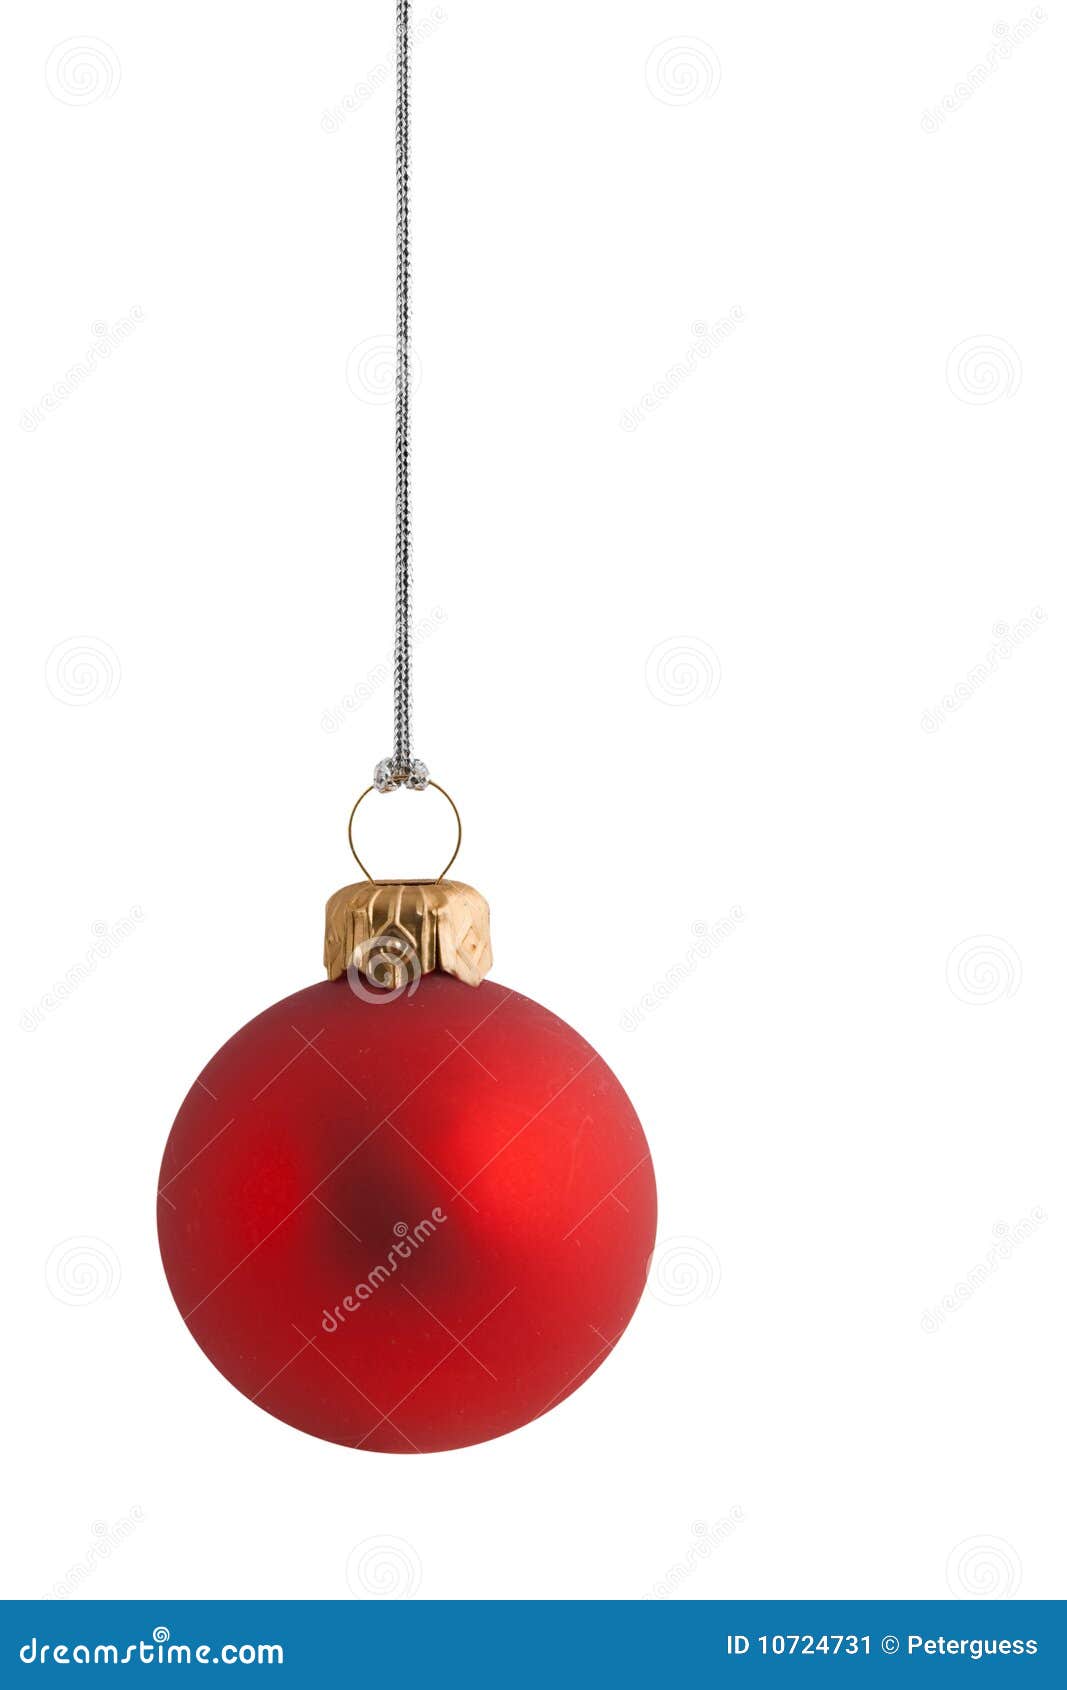 plain red christmas bauble